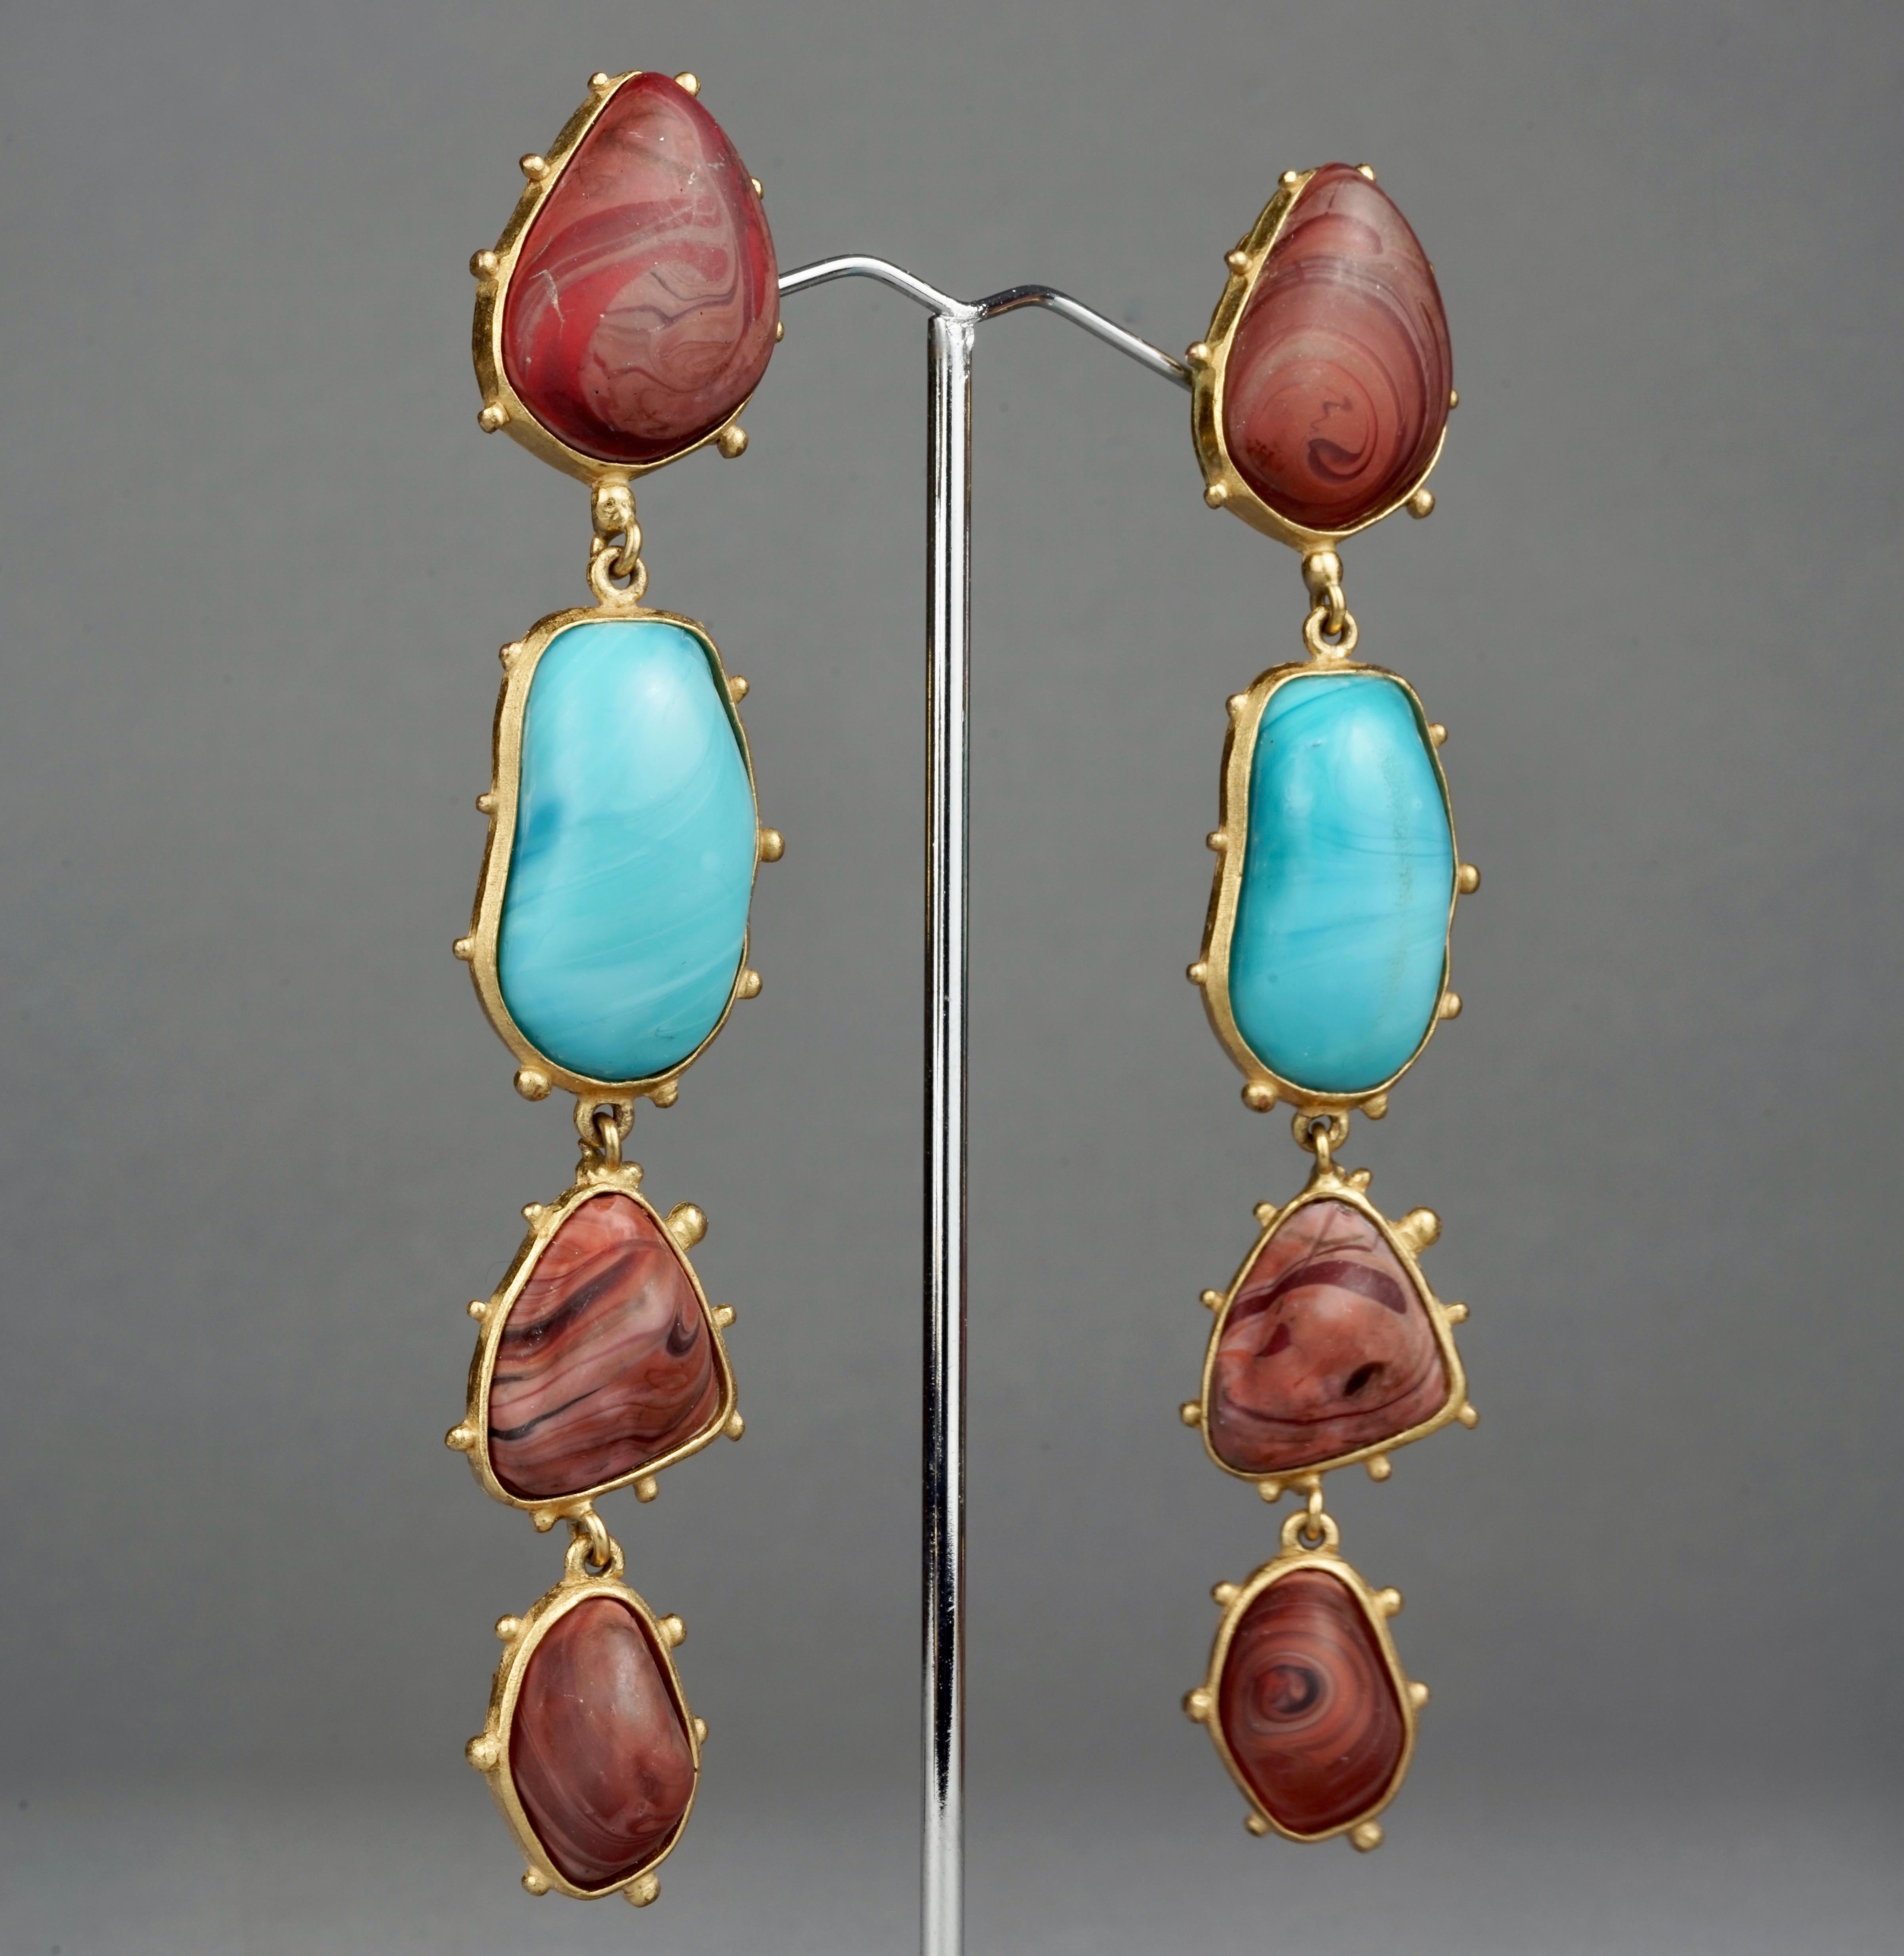 Vintage CHRISTIAN LACROIX Marble Turquoise Brown Dangling Earrings For Sale 2